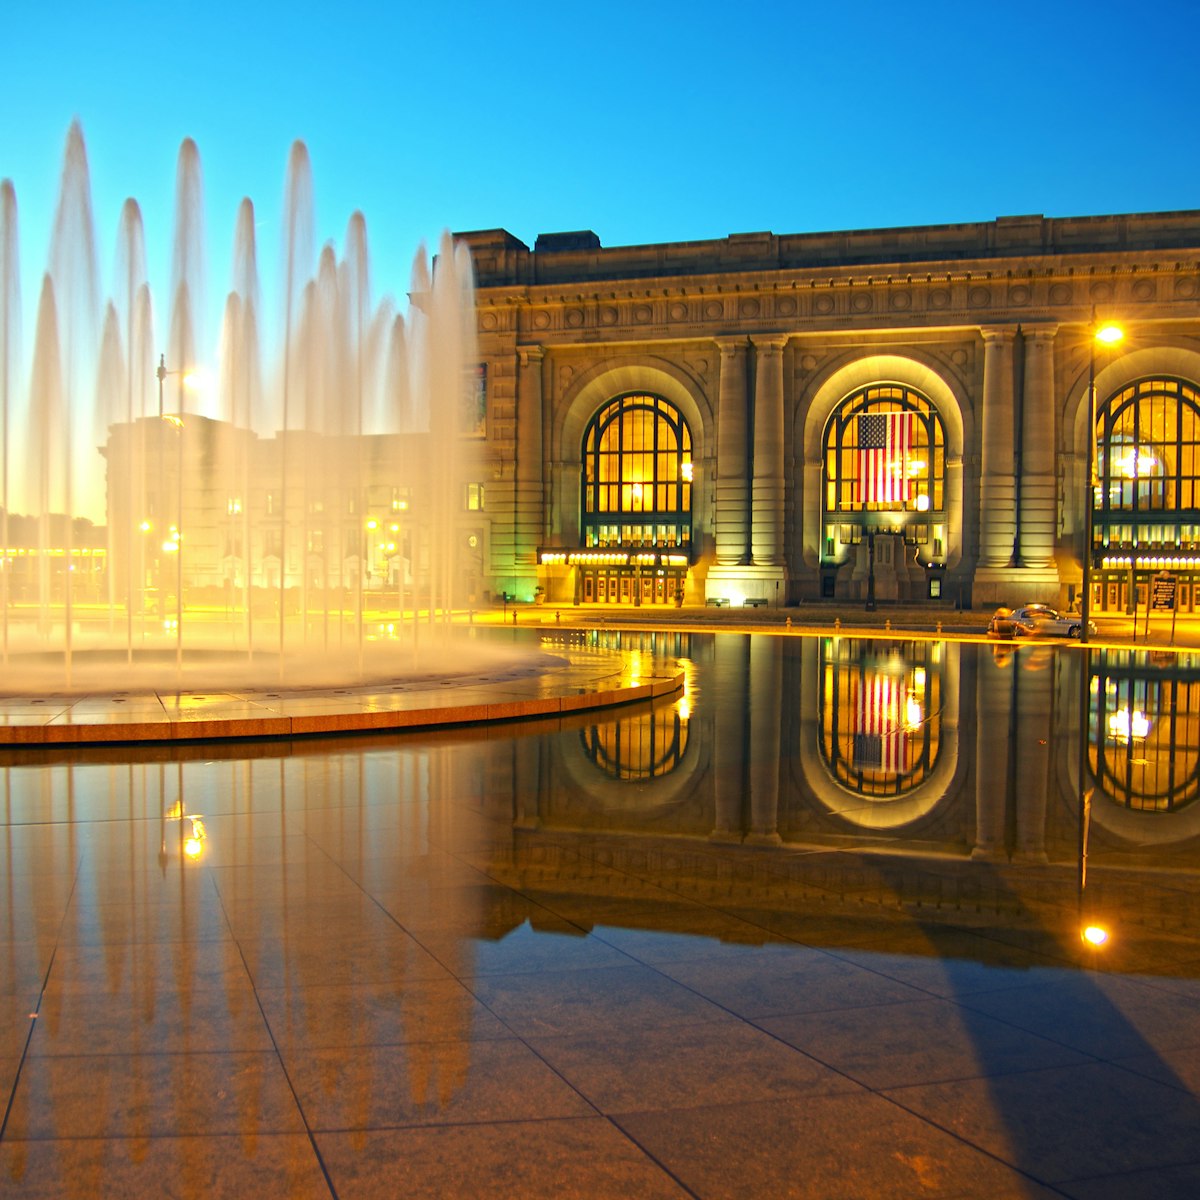 "Bloch Fountain in front of Union Station, Kansas City, MO"
171309094
"Clear Sky, Architecture And Buildings, Architecture Backgrounds, Building Exterior, Built Structure, City, Dusk, Famous Place, Fountain, Horizontal, Kansas, Kansas City - Missouri, Landmarks, Local Landmark, Midwest USA, Missouri, Nobody, Outdoors, Reflection, Sunset, Travel Locations, Twilight, USA, Union Station - Kansas City", Urban Scene, Water, Water Surface